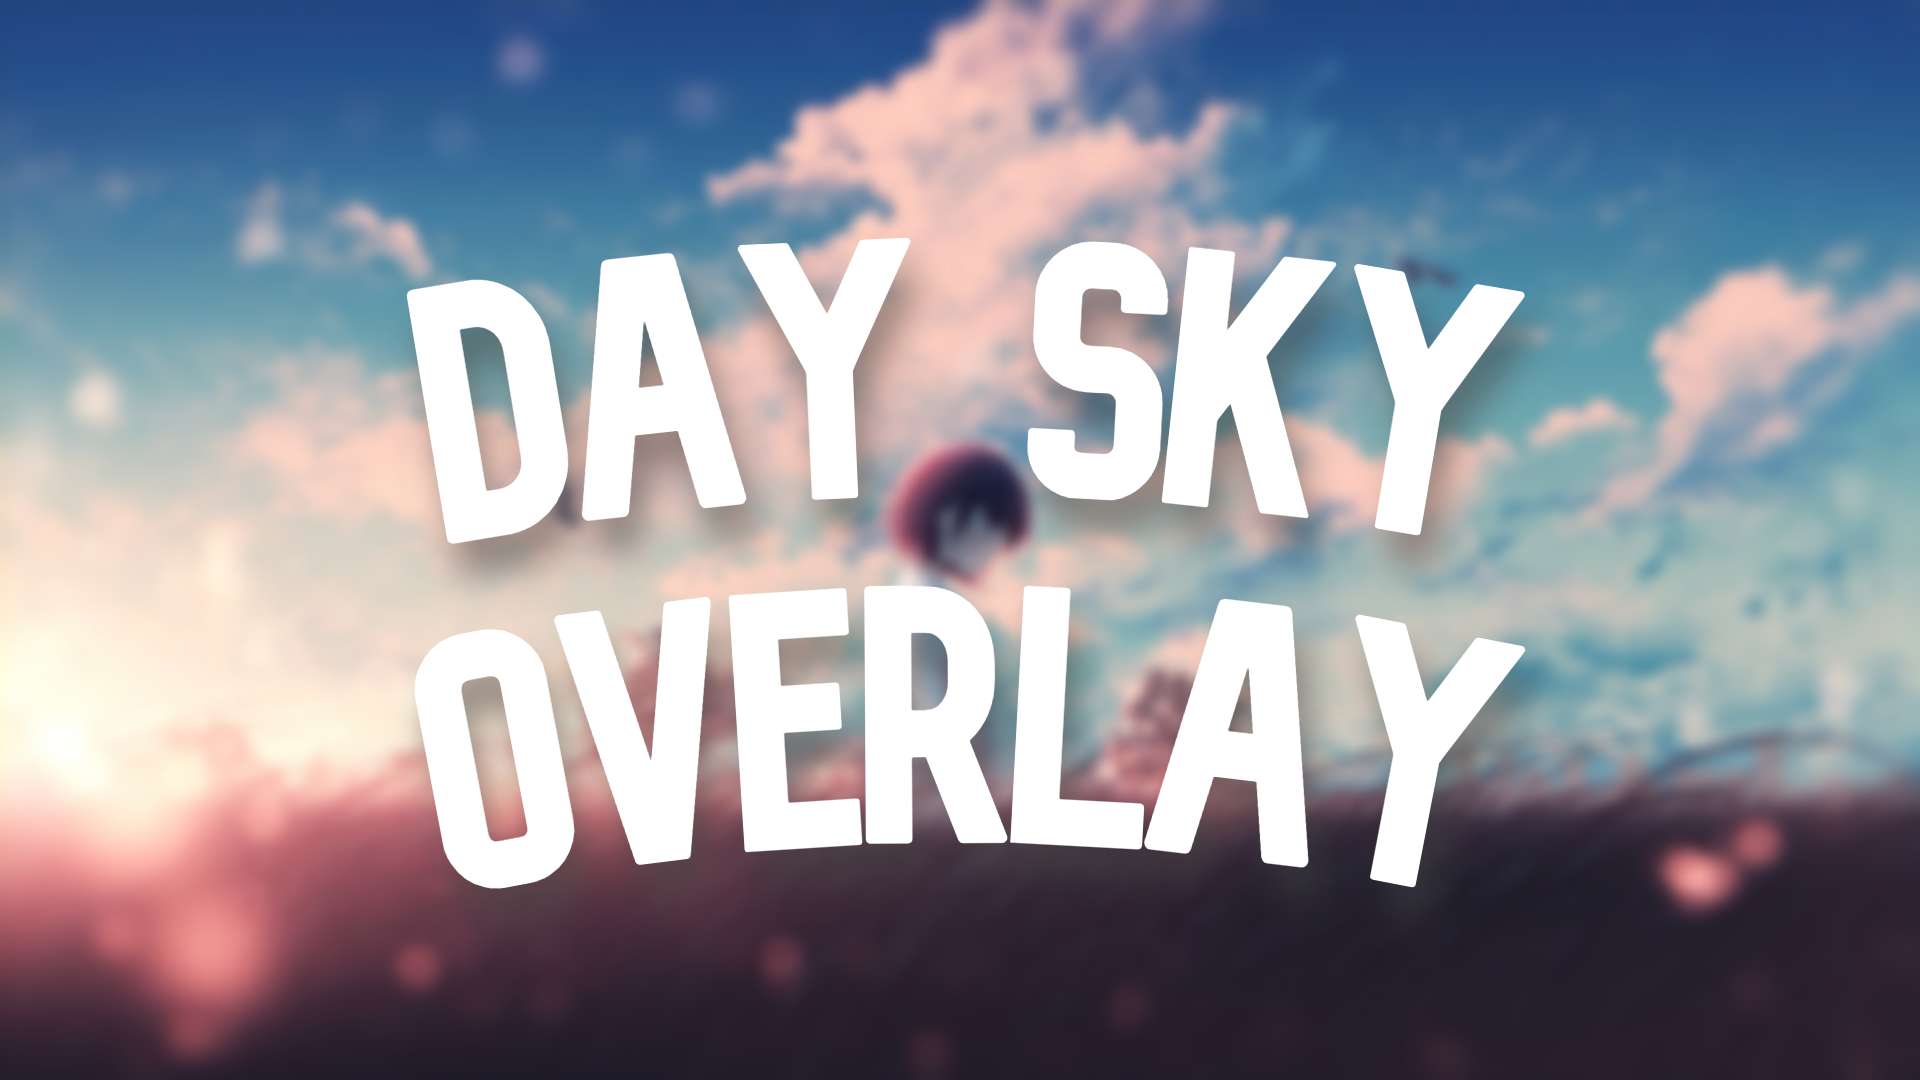 Day Sky Overlay #6 16 by Rh56 on PvPRP